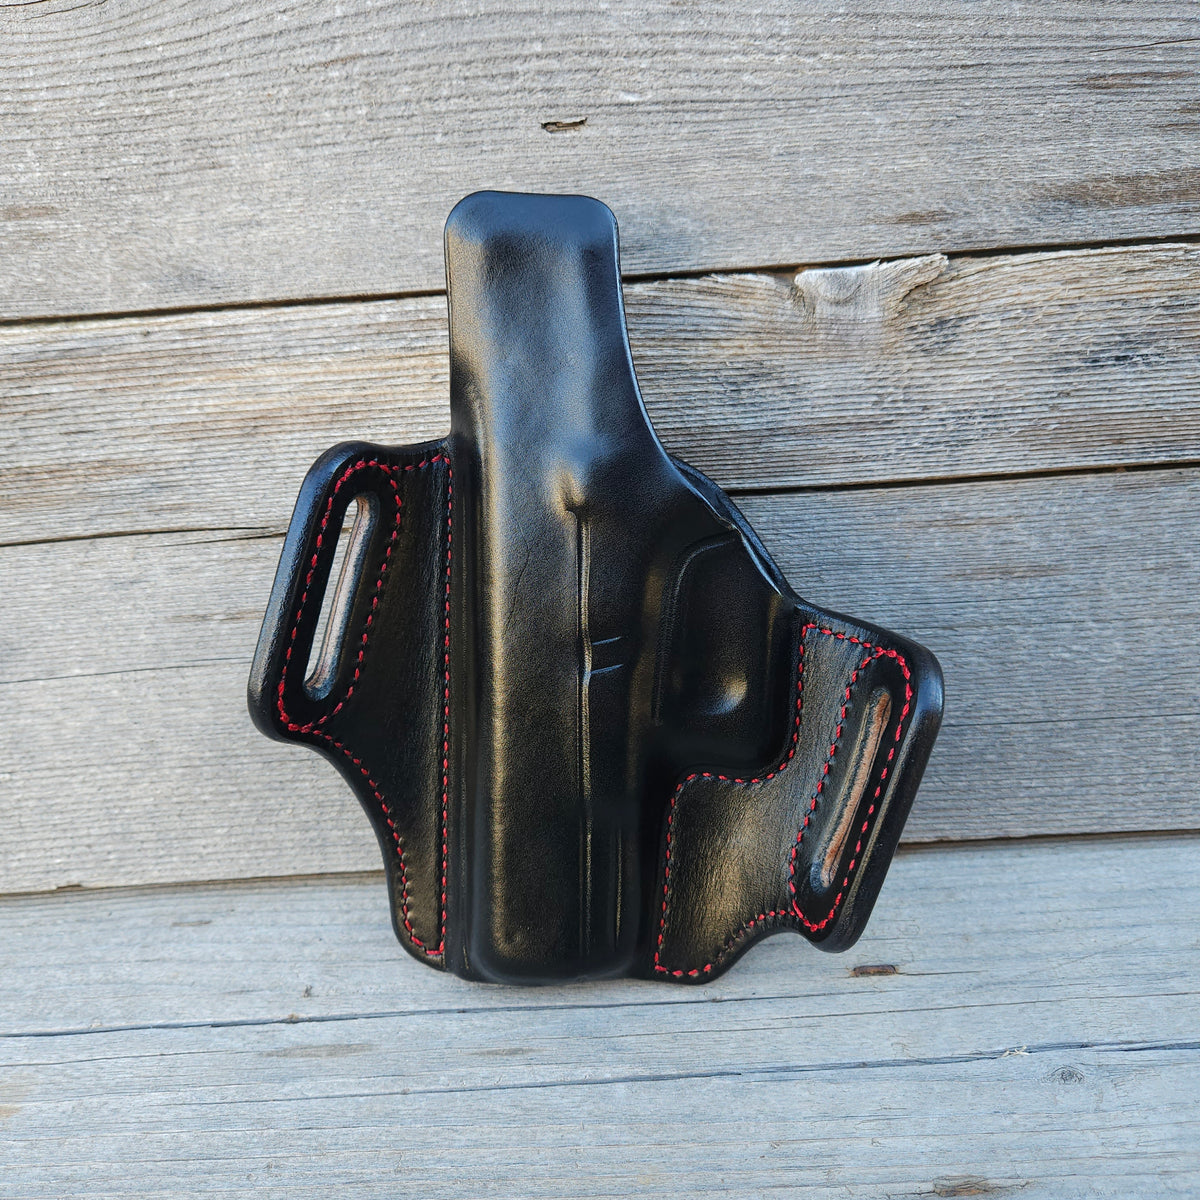 Glock 19/23 CLassic Holster All Black with Red Stitching and Partial Hex Stamp